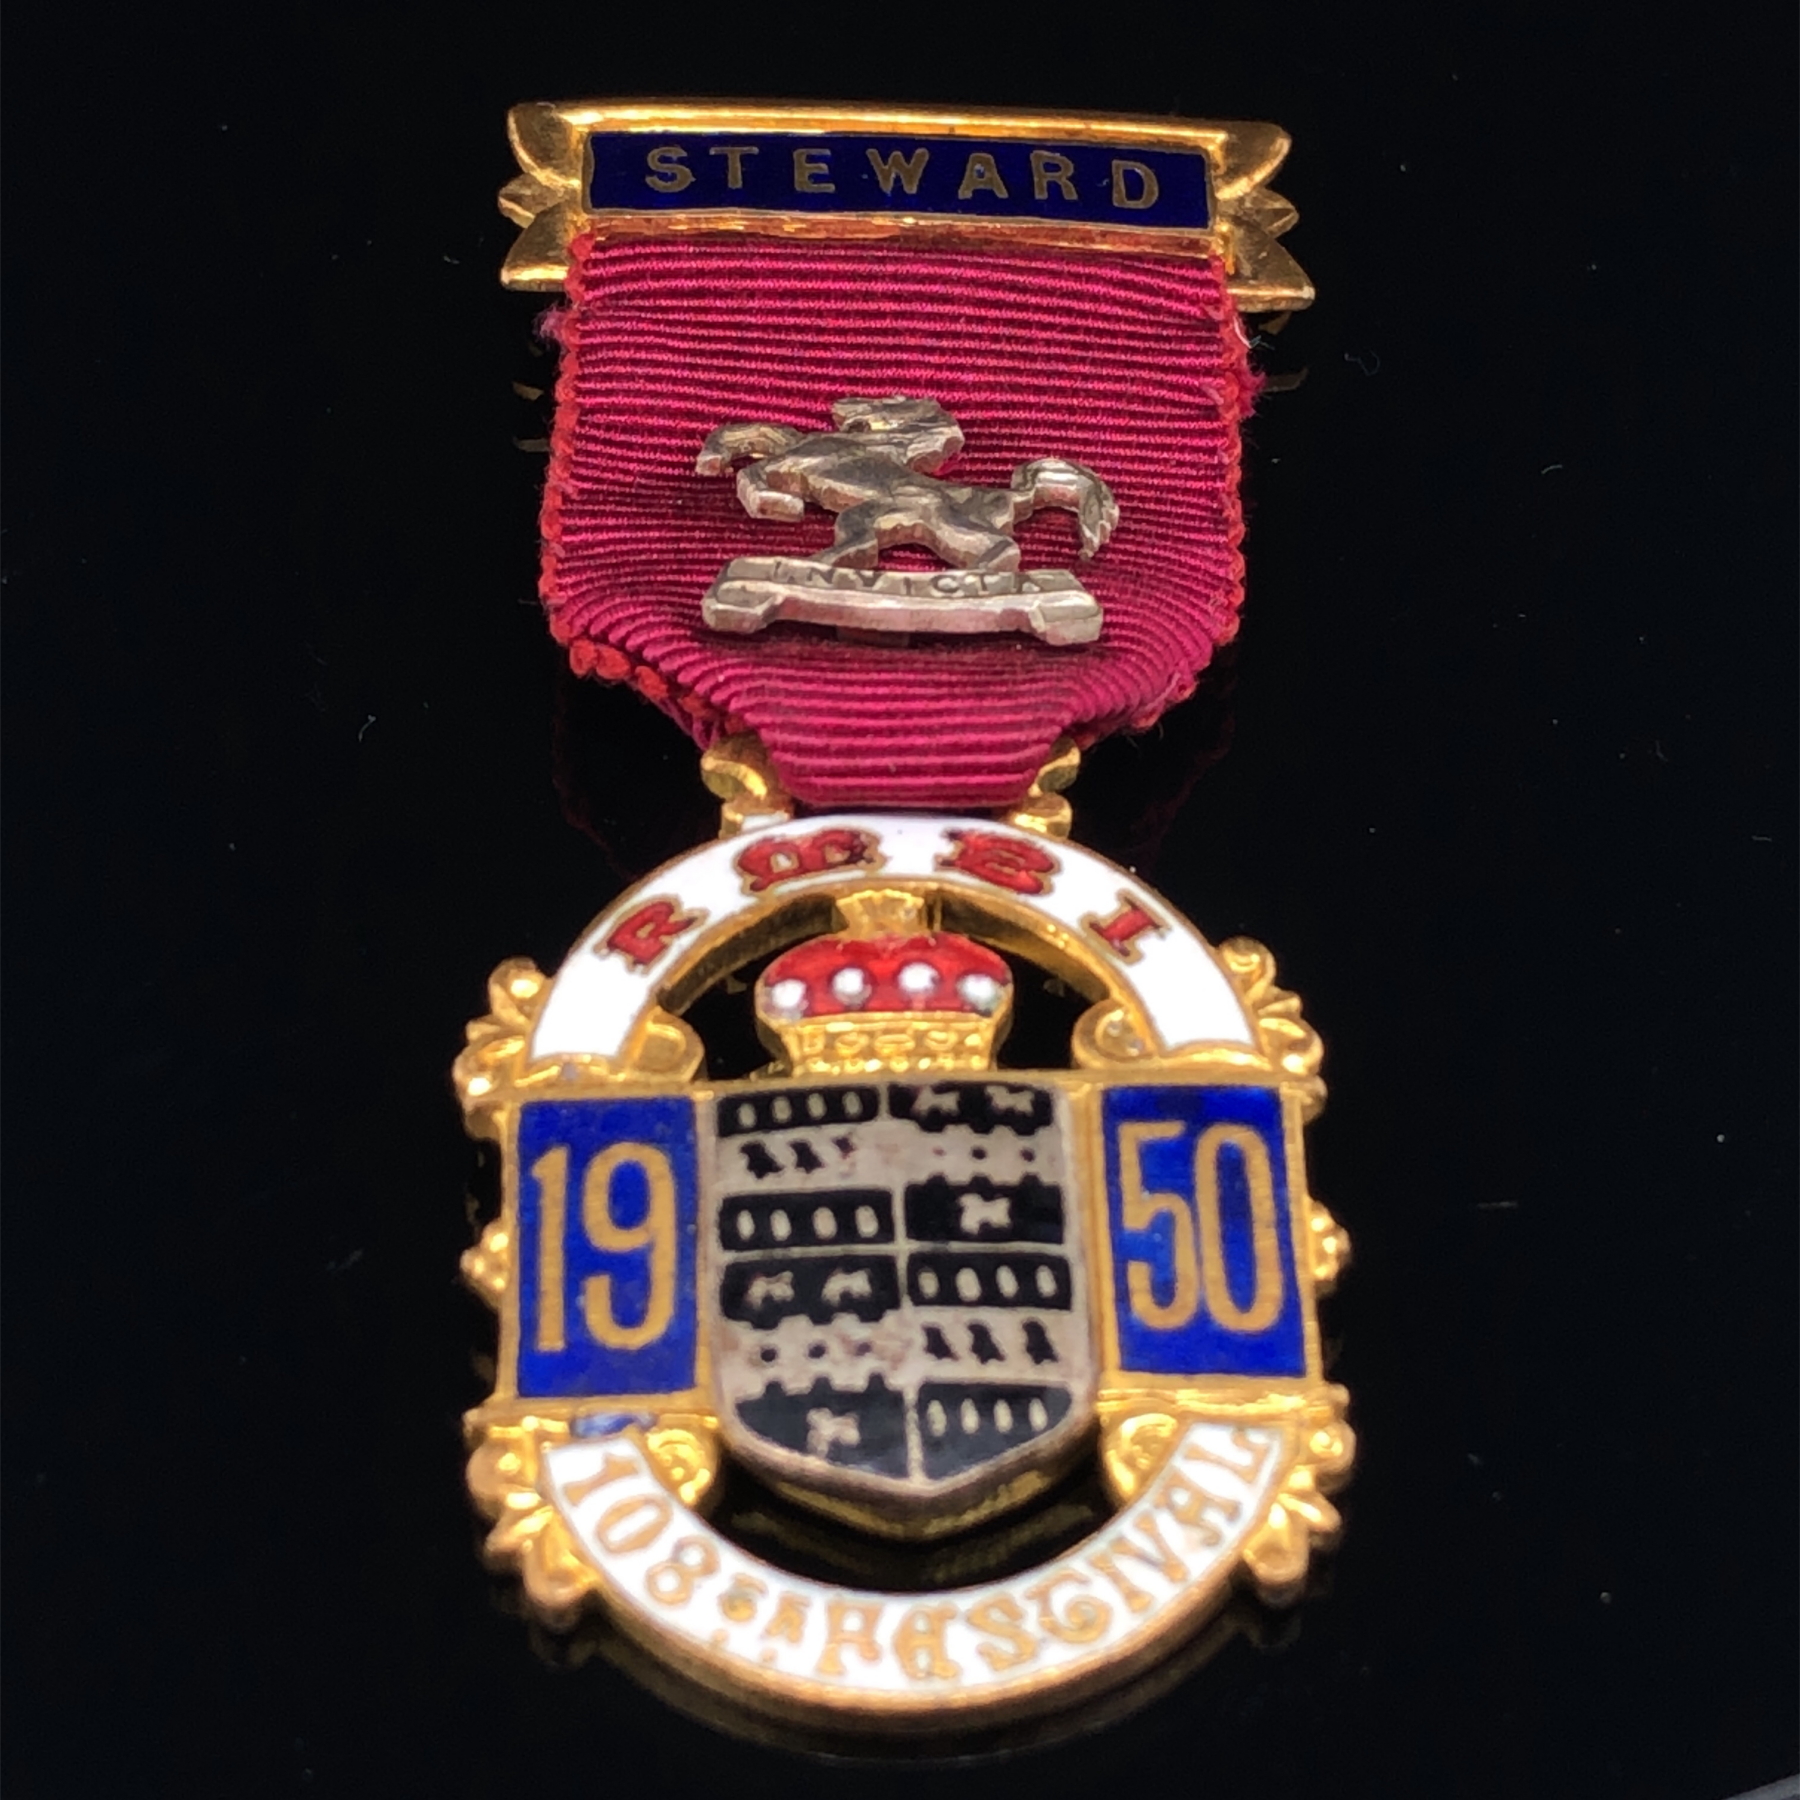 A HALLMARKED 9ct GOLD AND ENAMEL MAYORS MEDALLION, ENGRAVED WITH ENAMEL BANNERS 1951-54, AND FLOREAT - Image 10 of 11